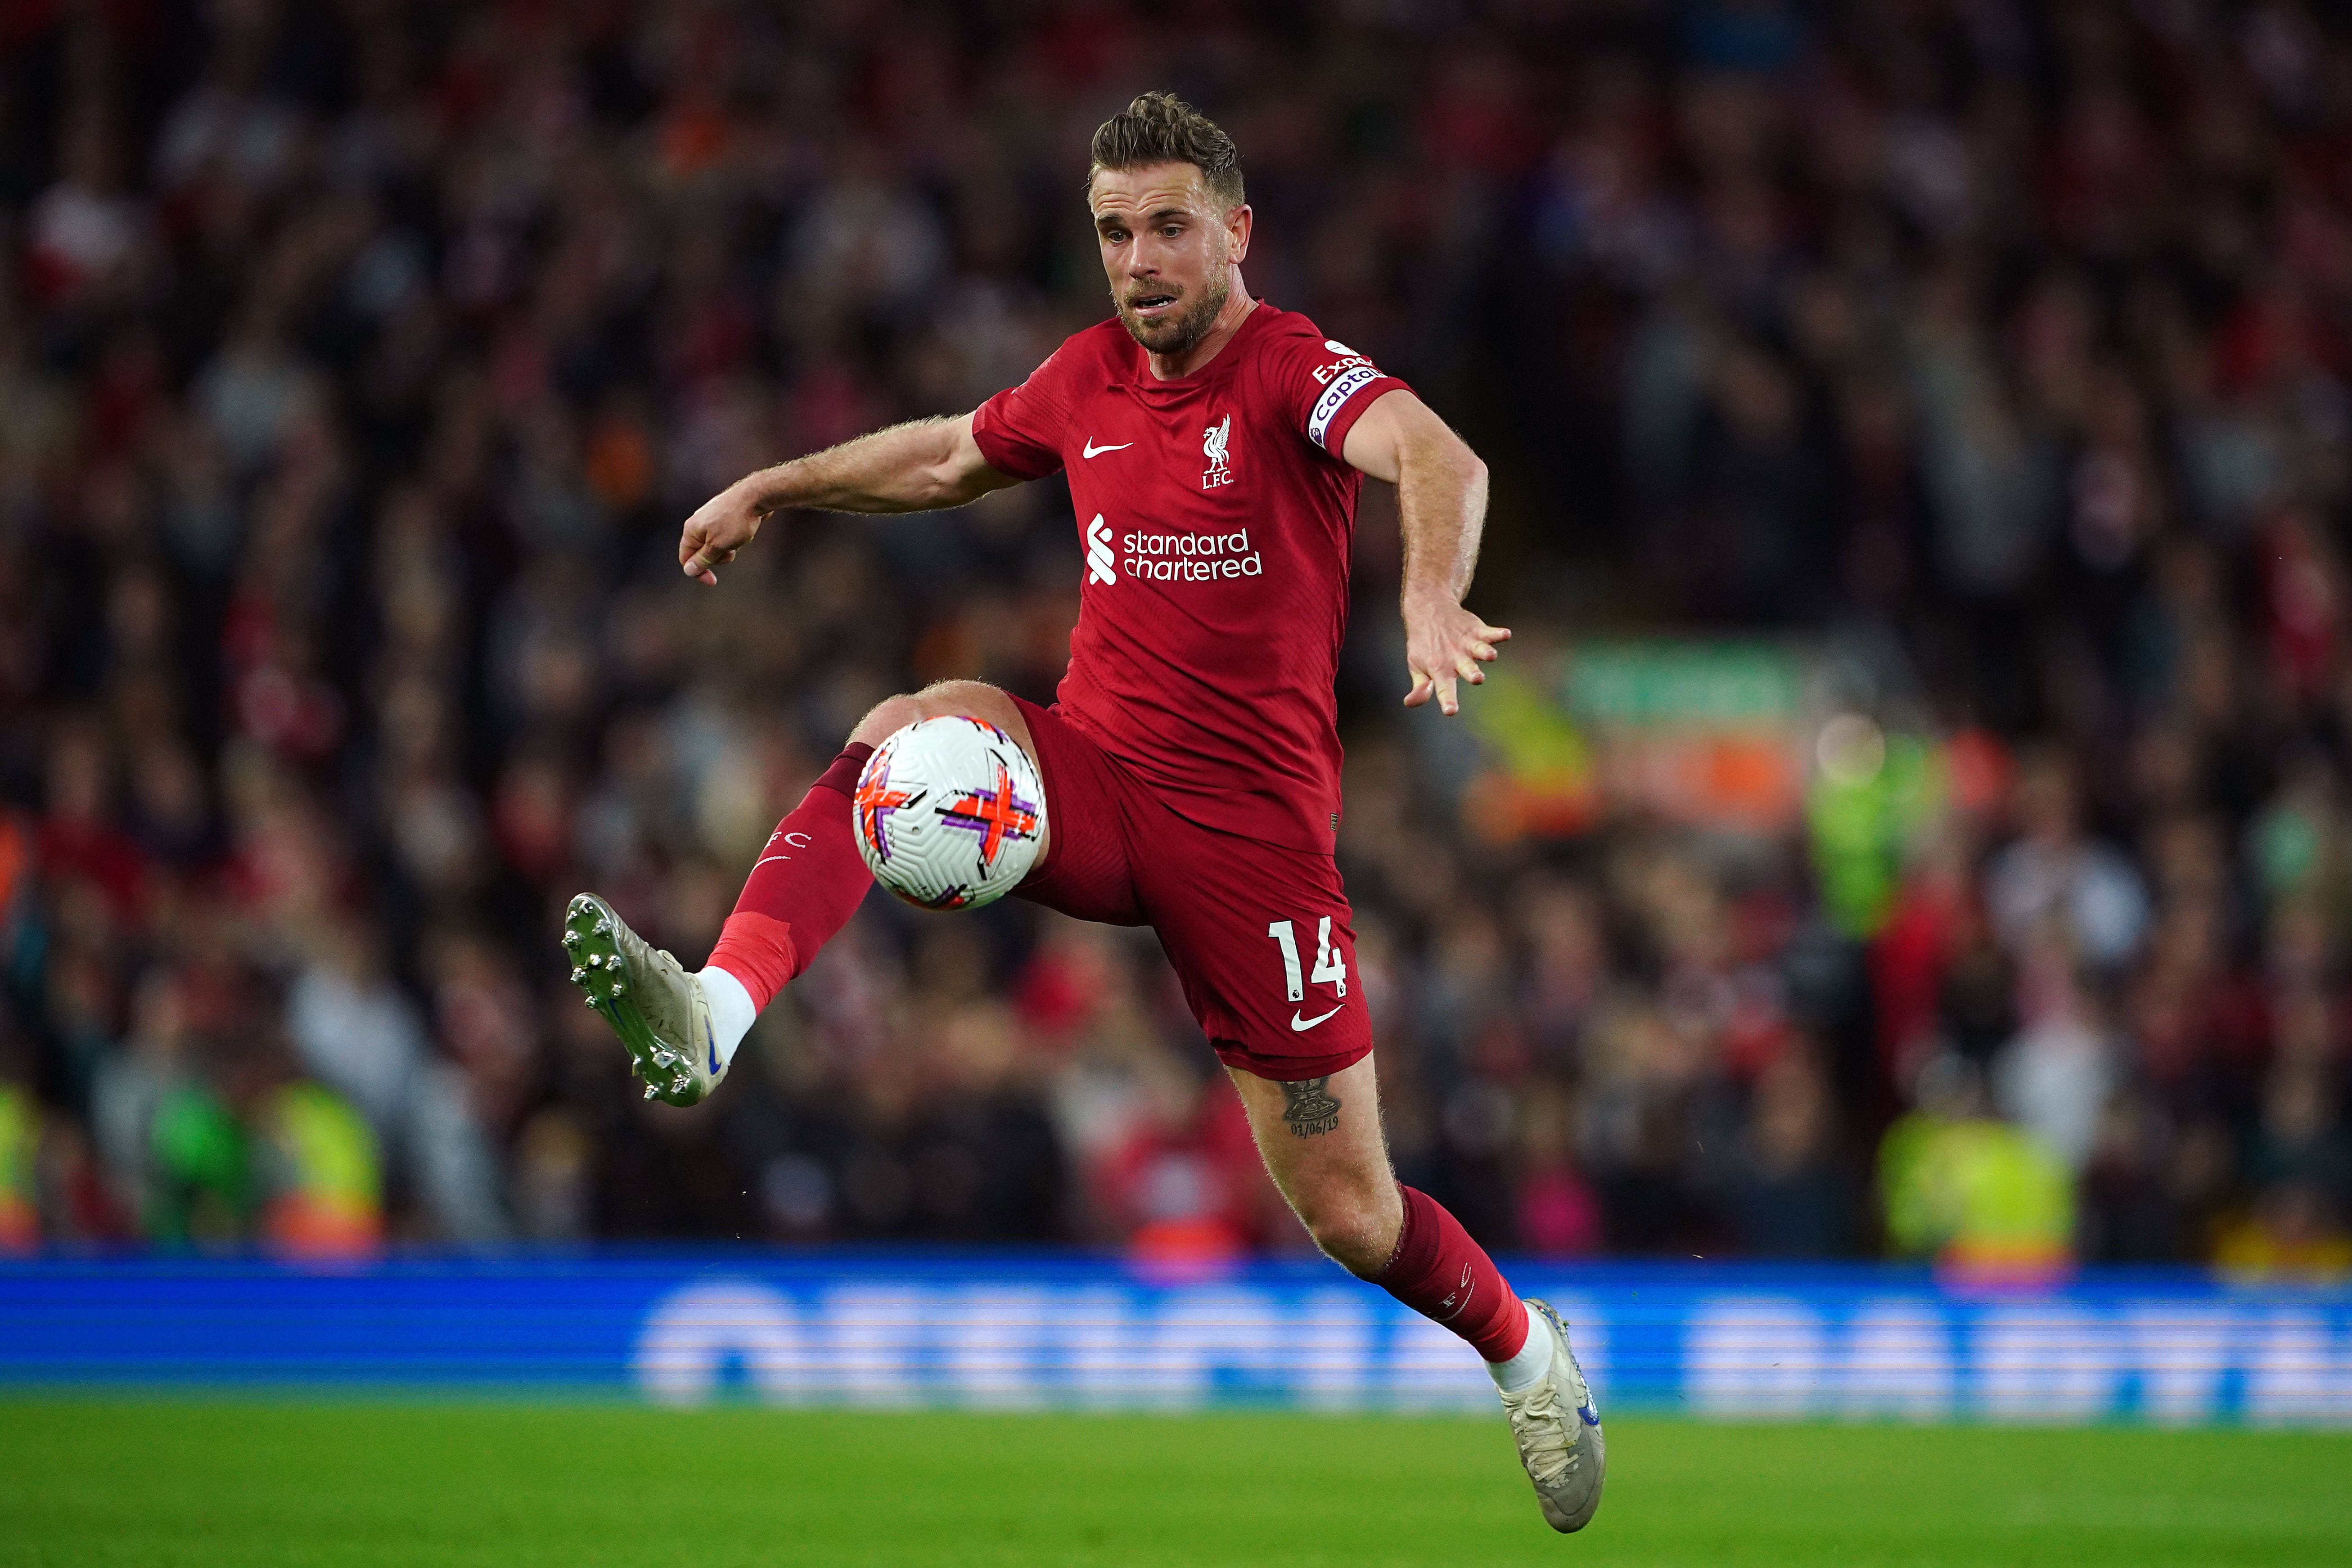 Liverpool captain Jordan Henderson says he is relishing the challenge after a controversial move to Saudi Arabian club Al-Ettifaq (Peter Byrne/PA)